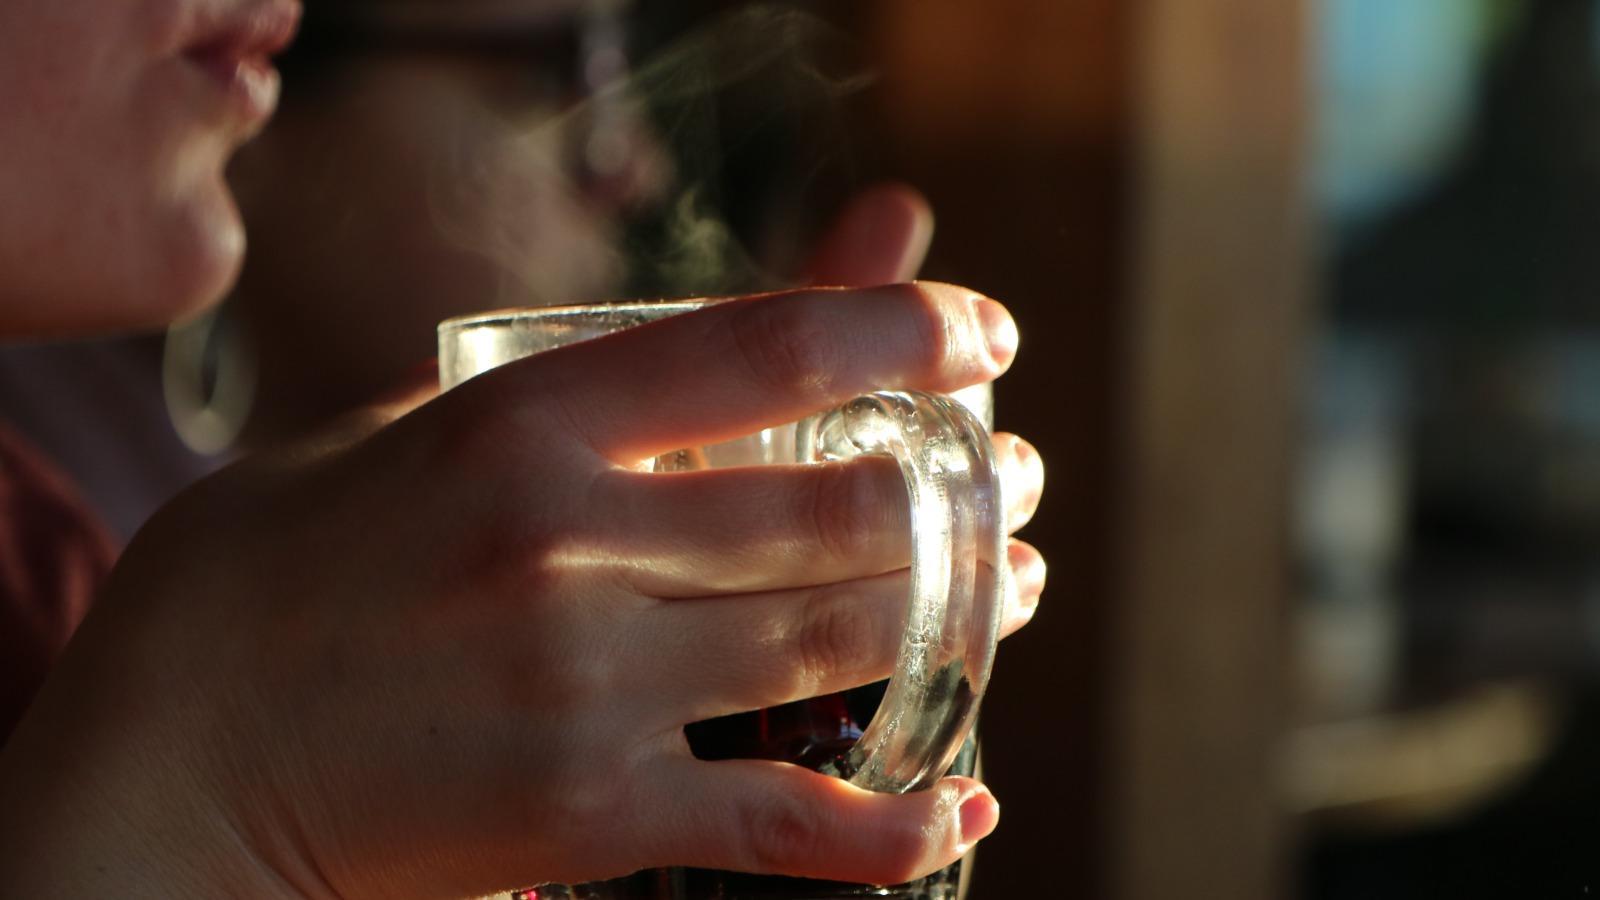 A person holding a glass of liquid

Description automatically generated